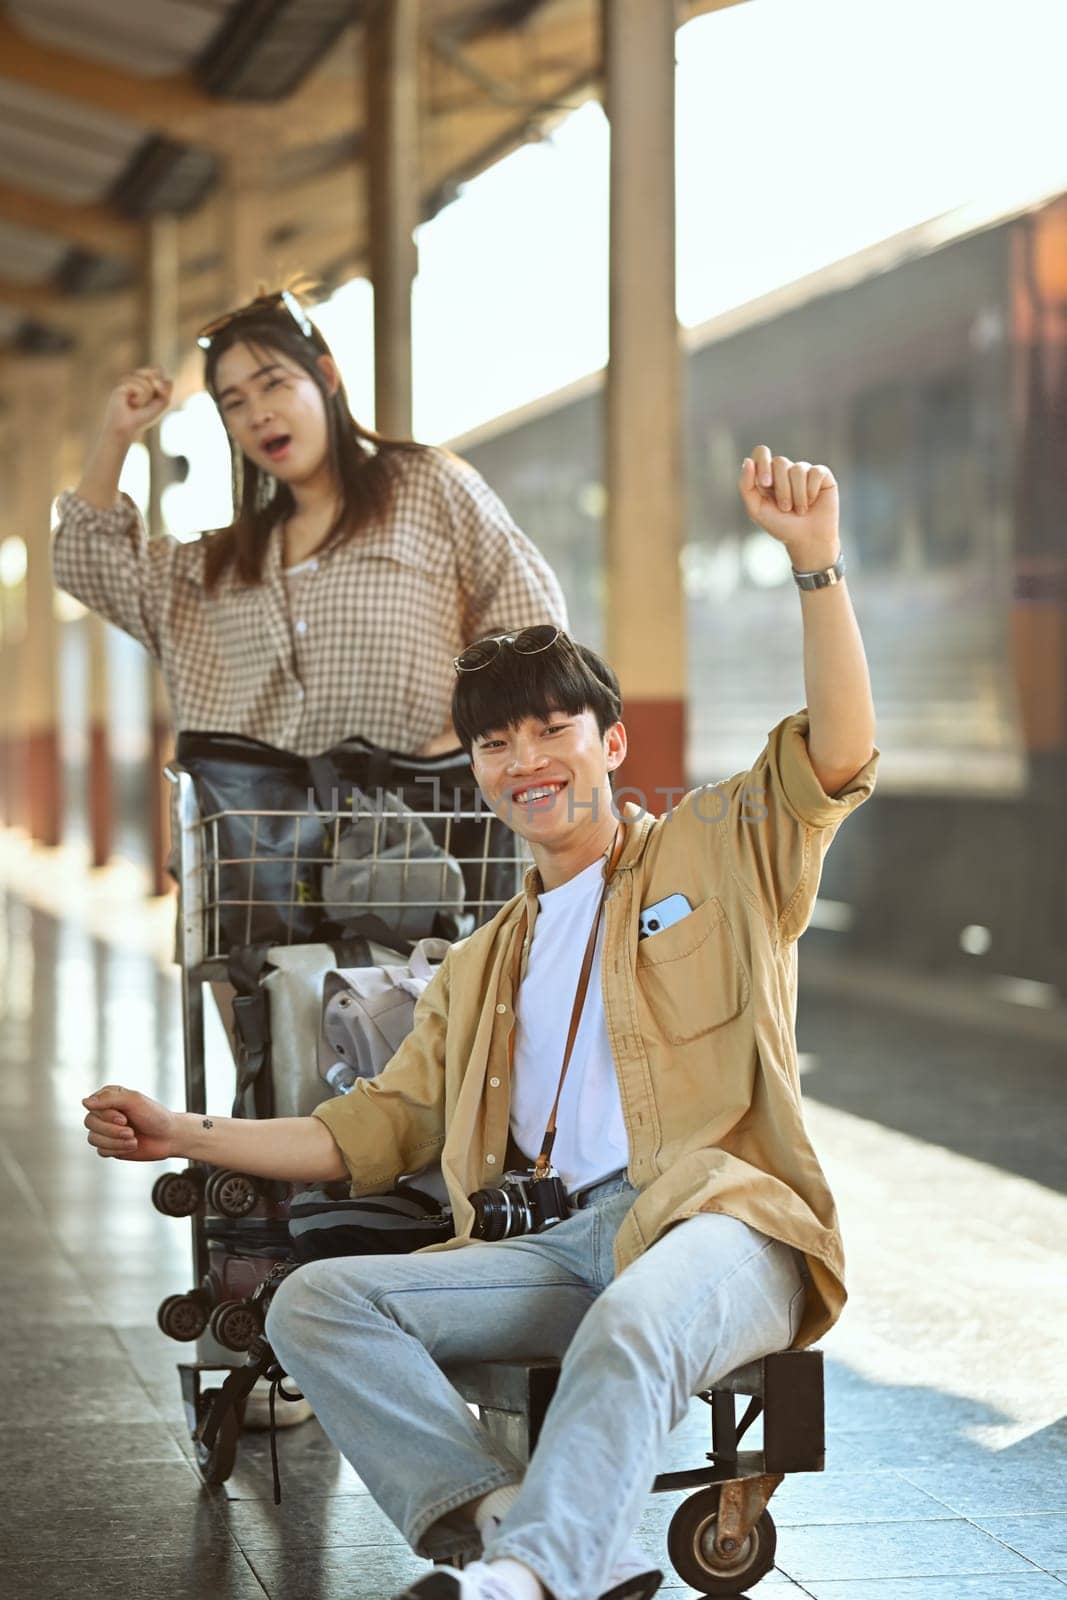 Cheerful young Asian couple arriving at train station while traveling on their vacation. Travel and lifestyle concept. by prathanchorruangsak